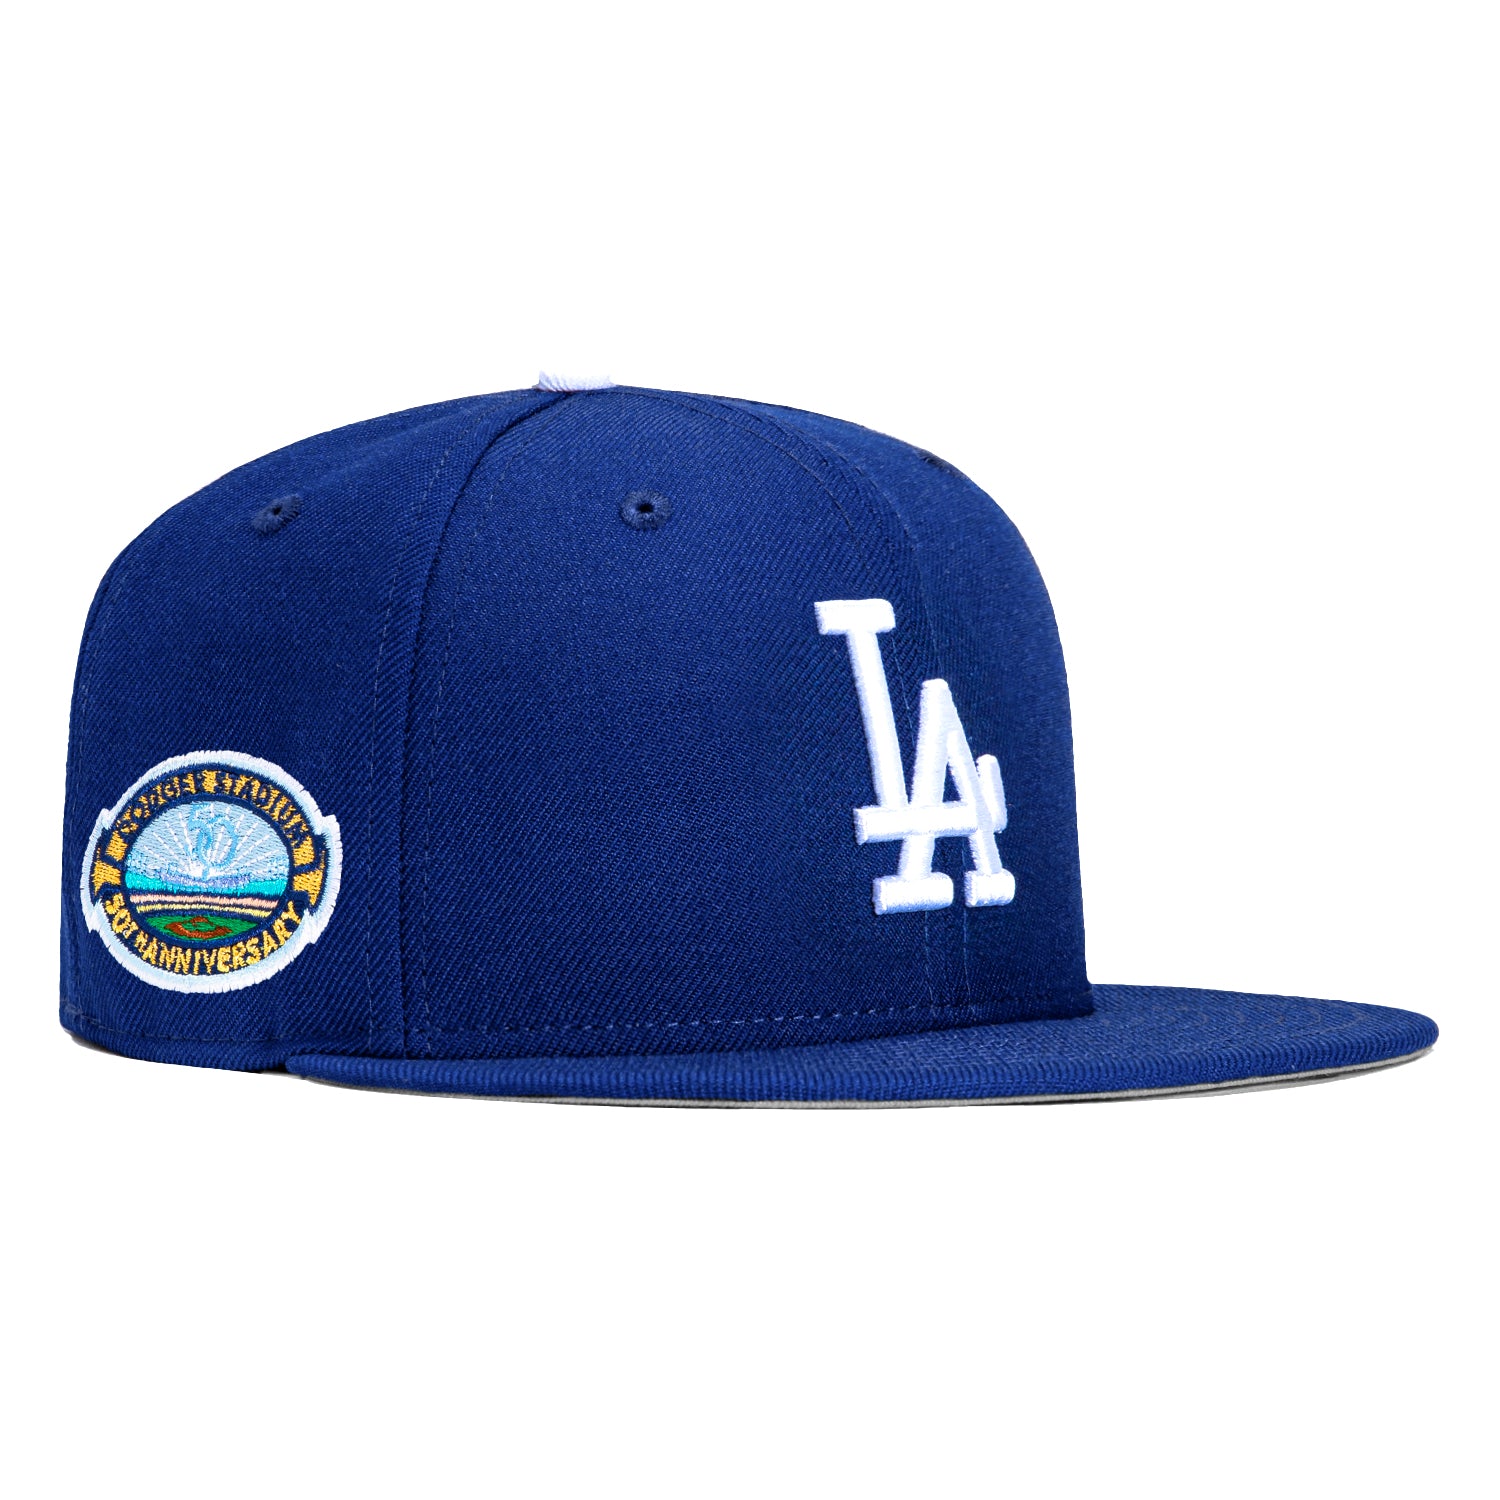 New Era 59Fifty Los Angeles Dodgers 50th Anniversary Stadium Patch Hat